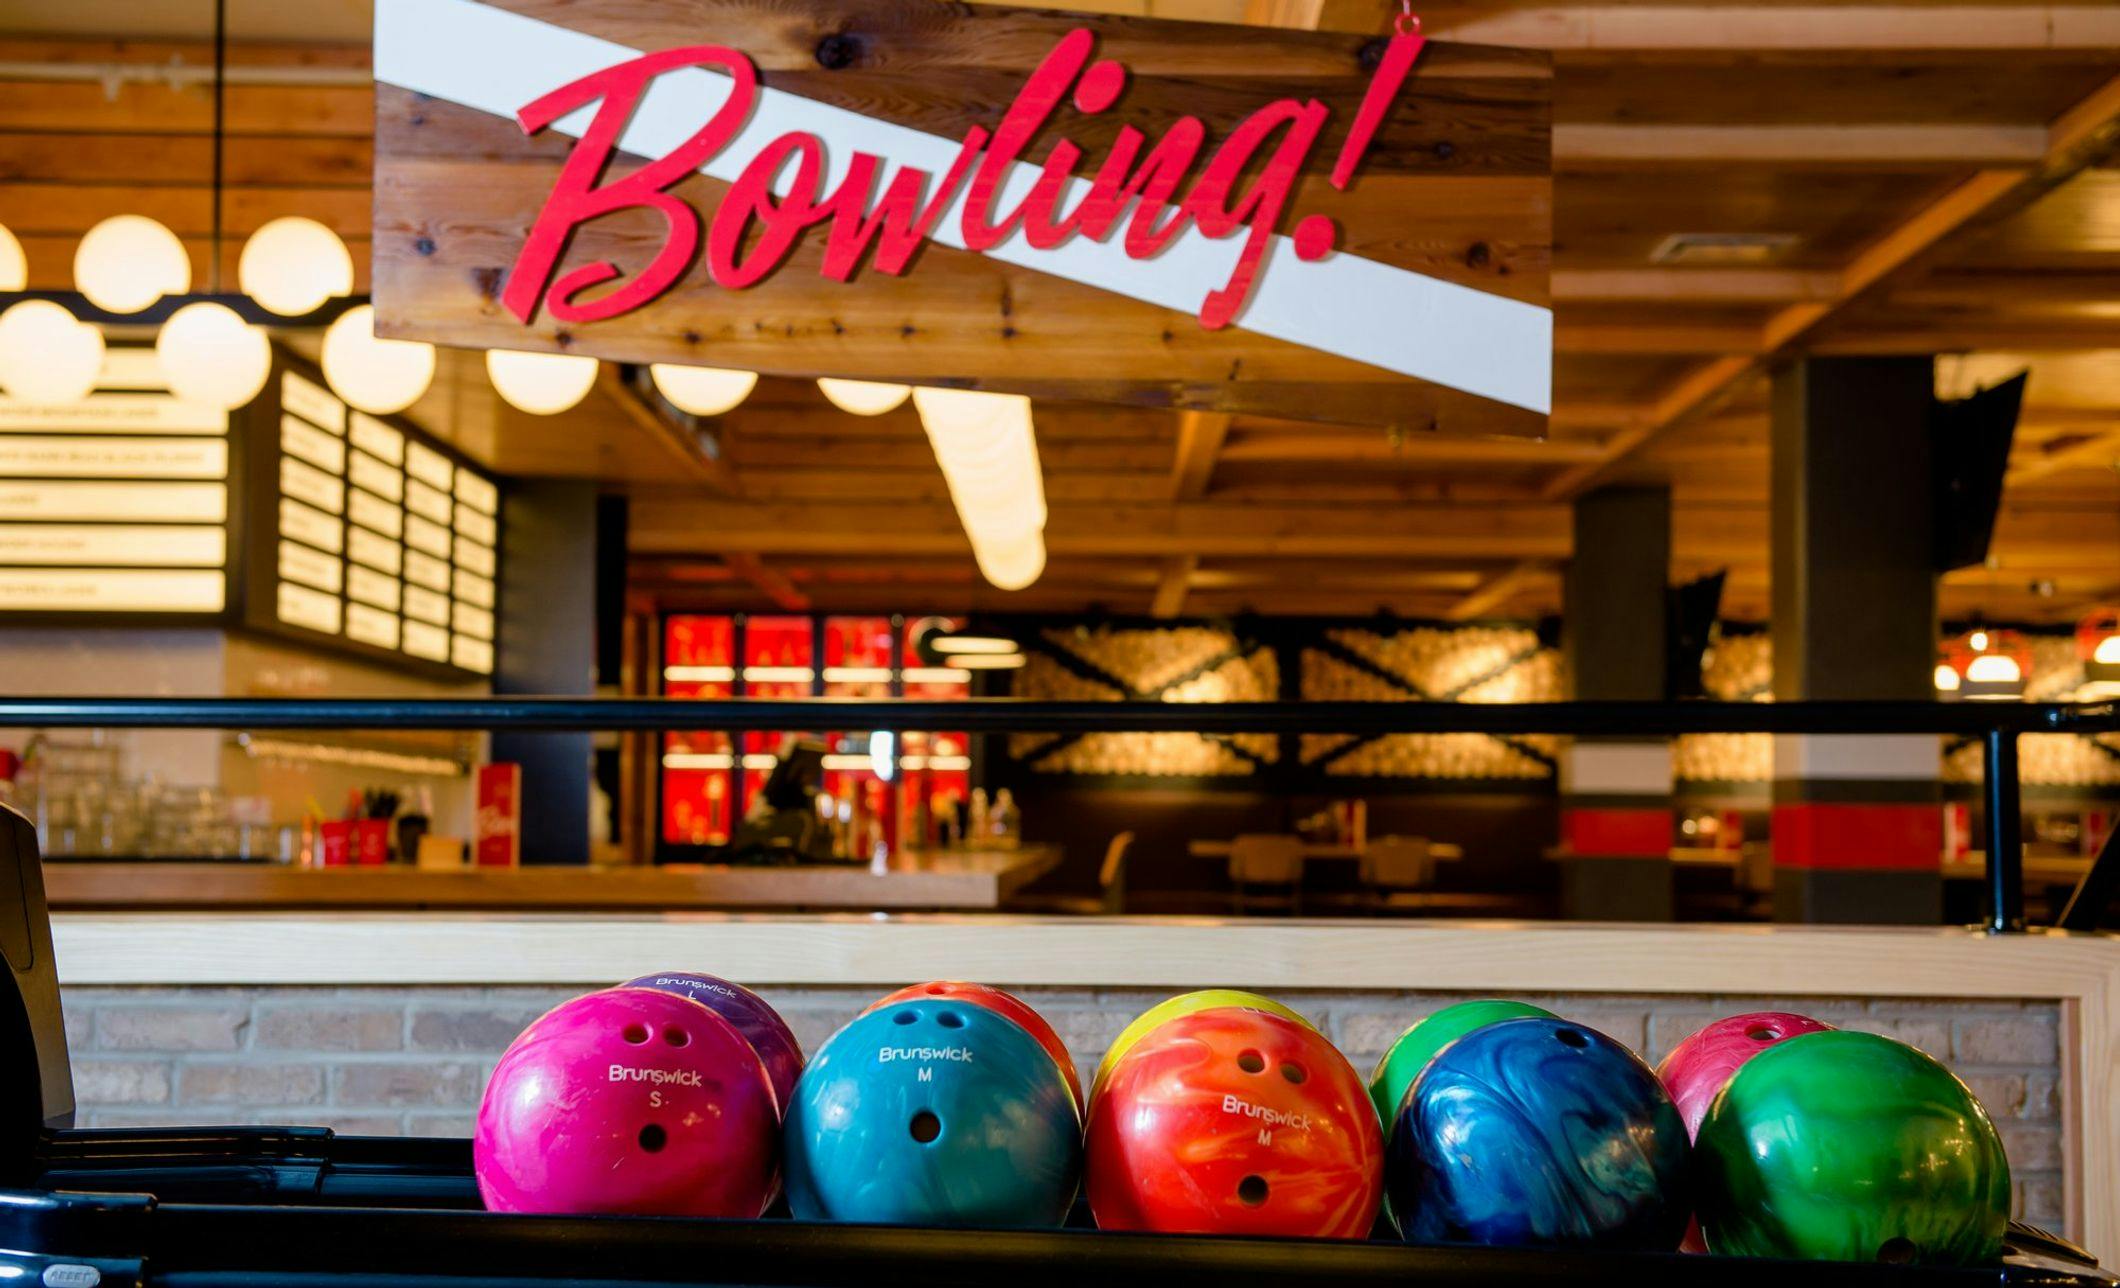 A bowling sign in the background with colourful bowling balls in the foreground